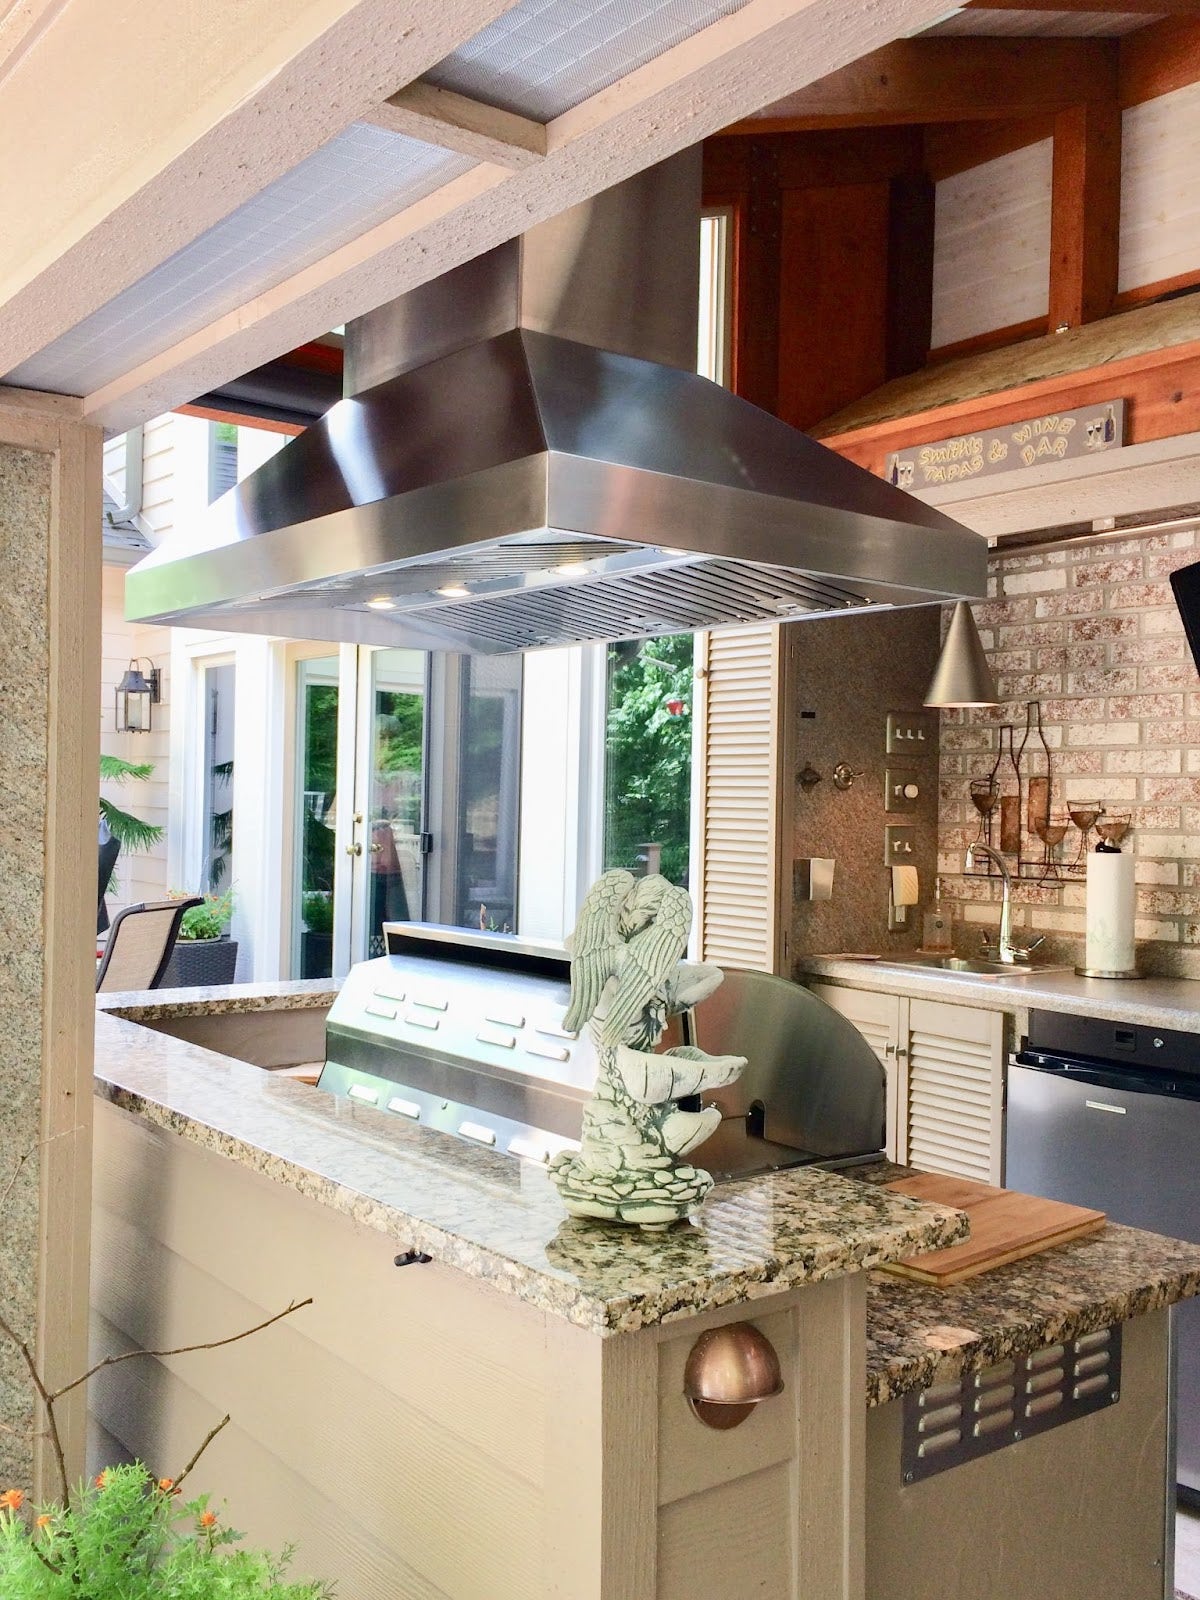 Tranquil backyard cooking nook featuring a modern BBQ grill, vent hood, and a sculpted angel decor on the counter, with a view into the inviting home interior. - Proline Range Hoods - prolinerangehoods.com 